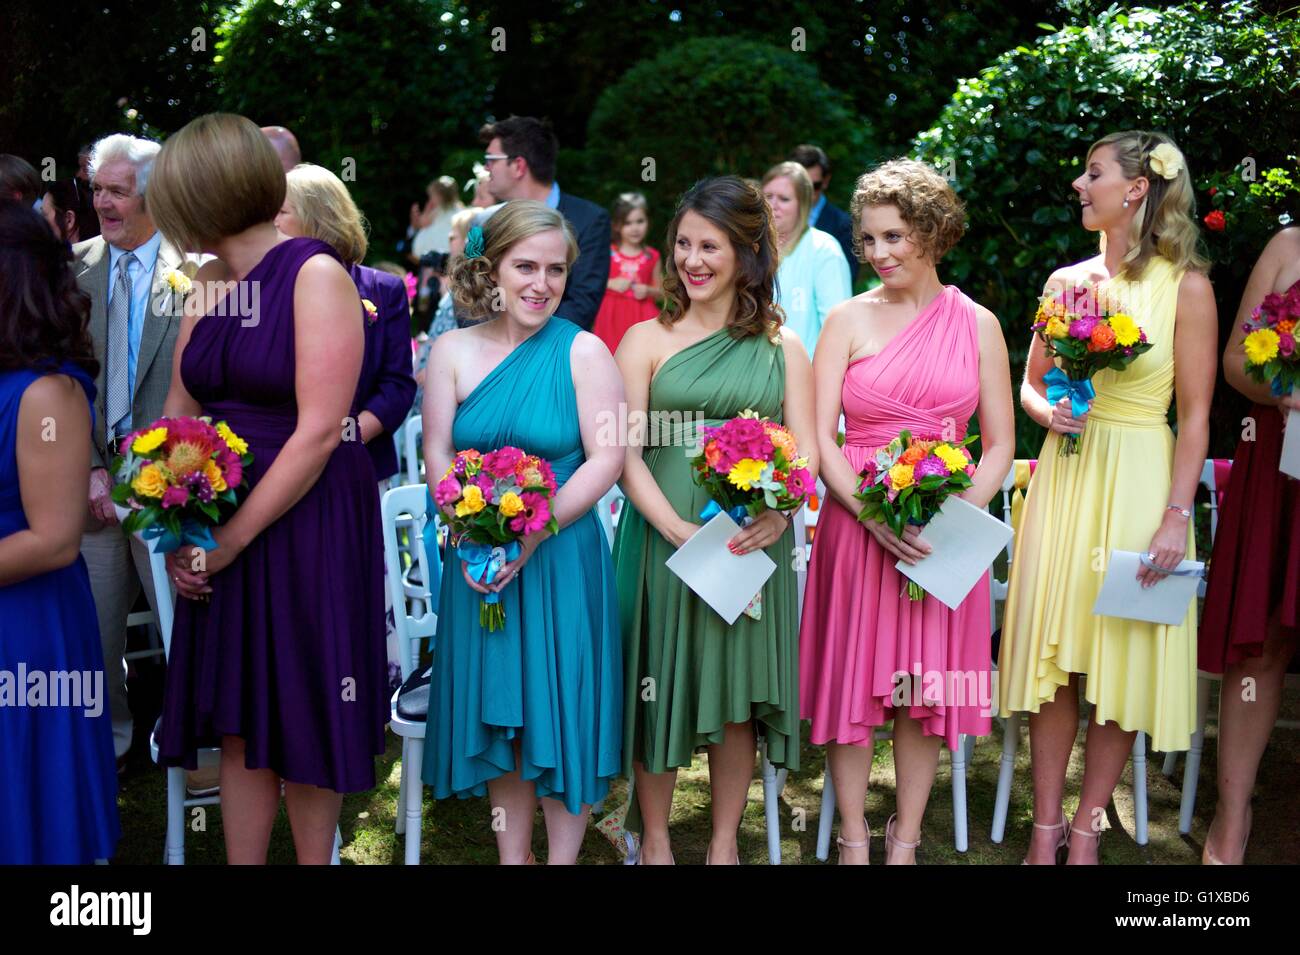 Bridesmaids waiting for bride to arrive at outdoor wedding ceremony whilst wearing bright coloured dresses. Stock Photo